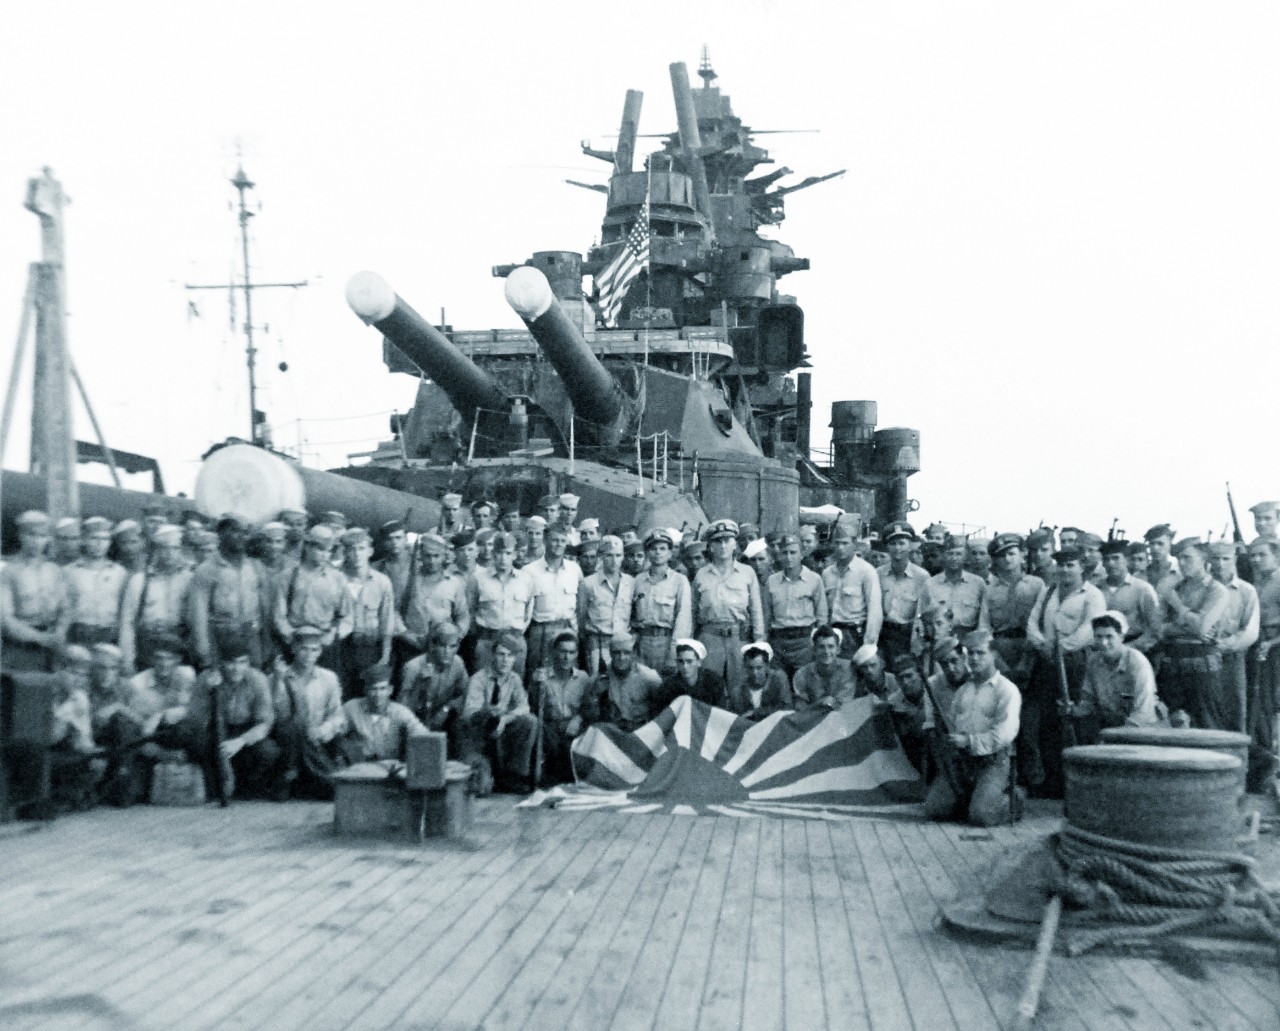 80-G-421082:   Japanese battleship Nagato, 1945.    On board the Japanese battleship Nagato at Japan.  U.S. Forces spread Japanese flag on deck.  Photographed by crew of USS Iowa (BB-61), August 1945.   Official U.S. Navy Photograph, now in the collections of the National Archives.   (2014/8/20). 